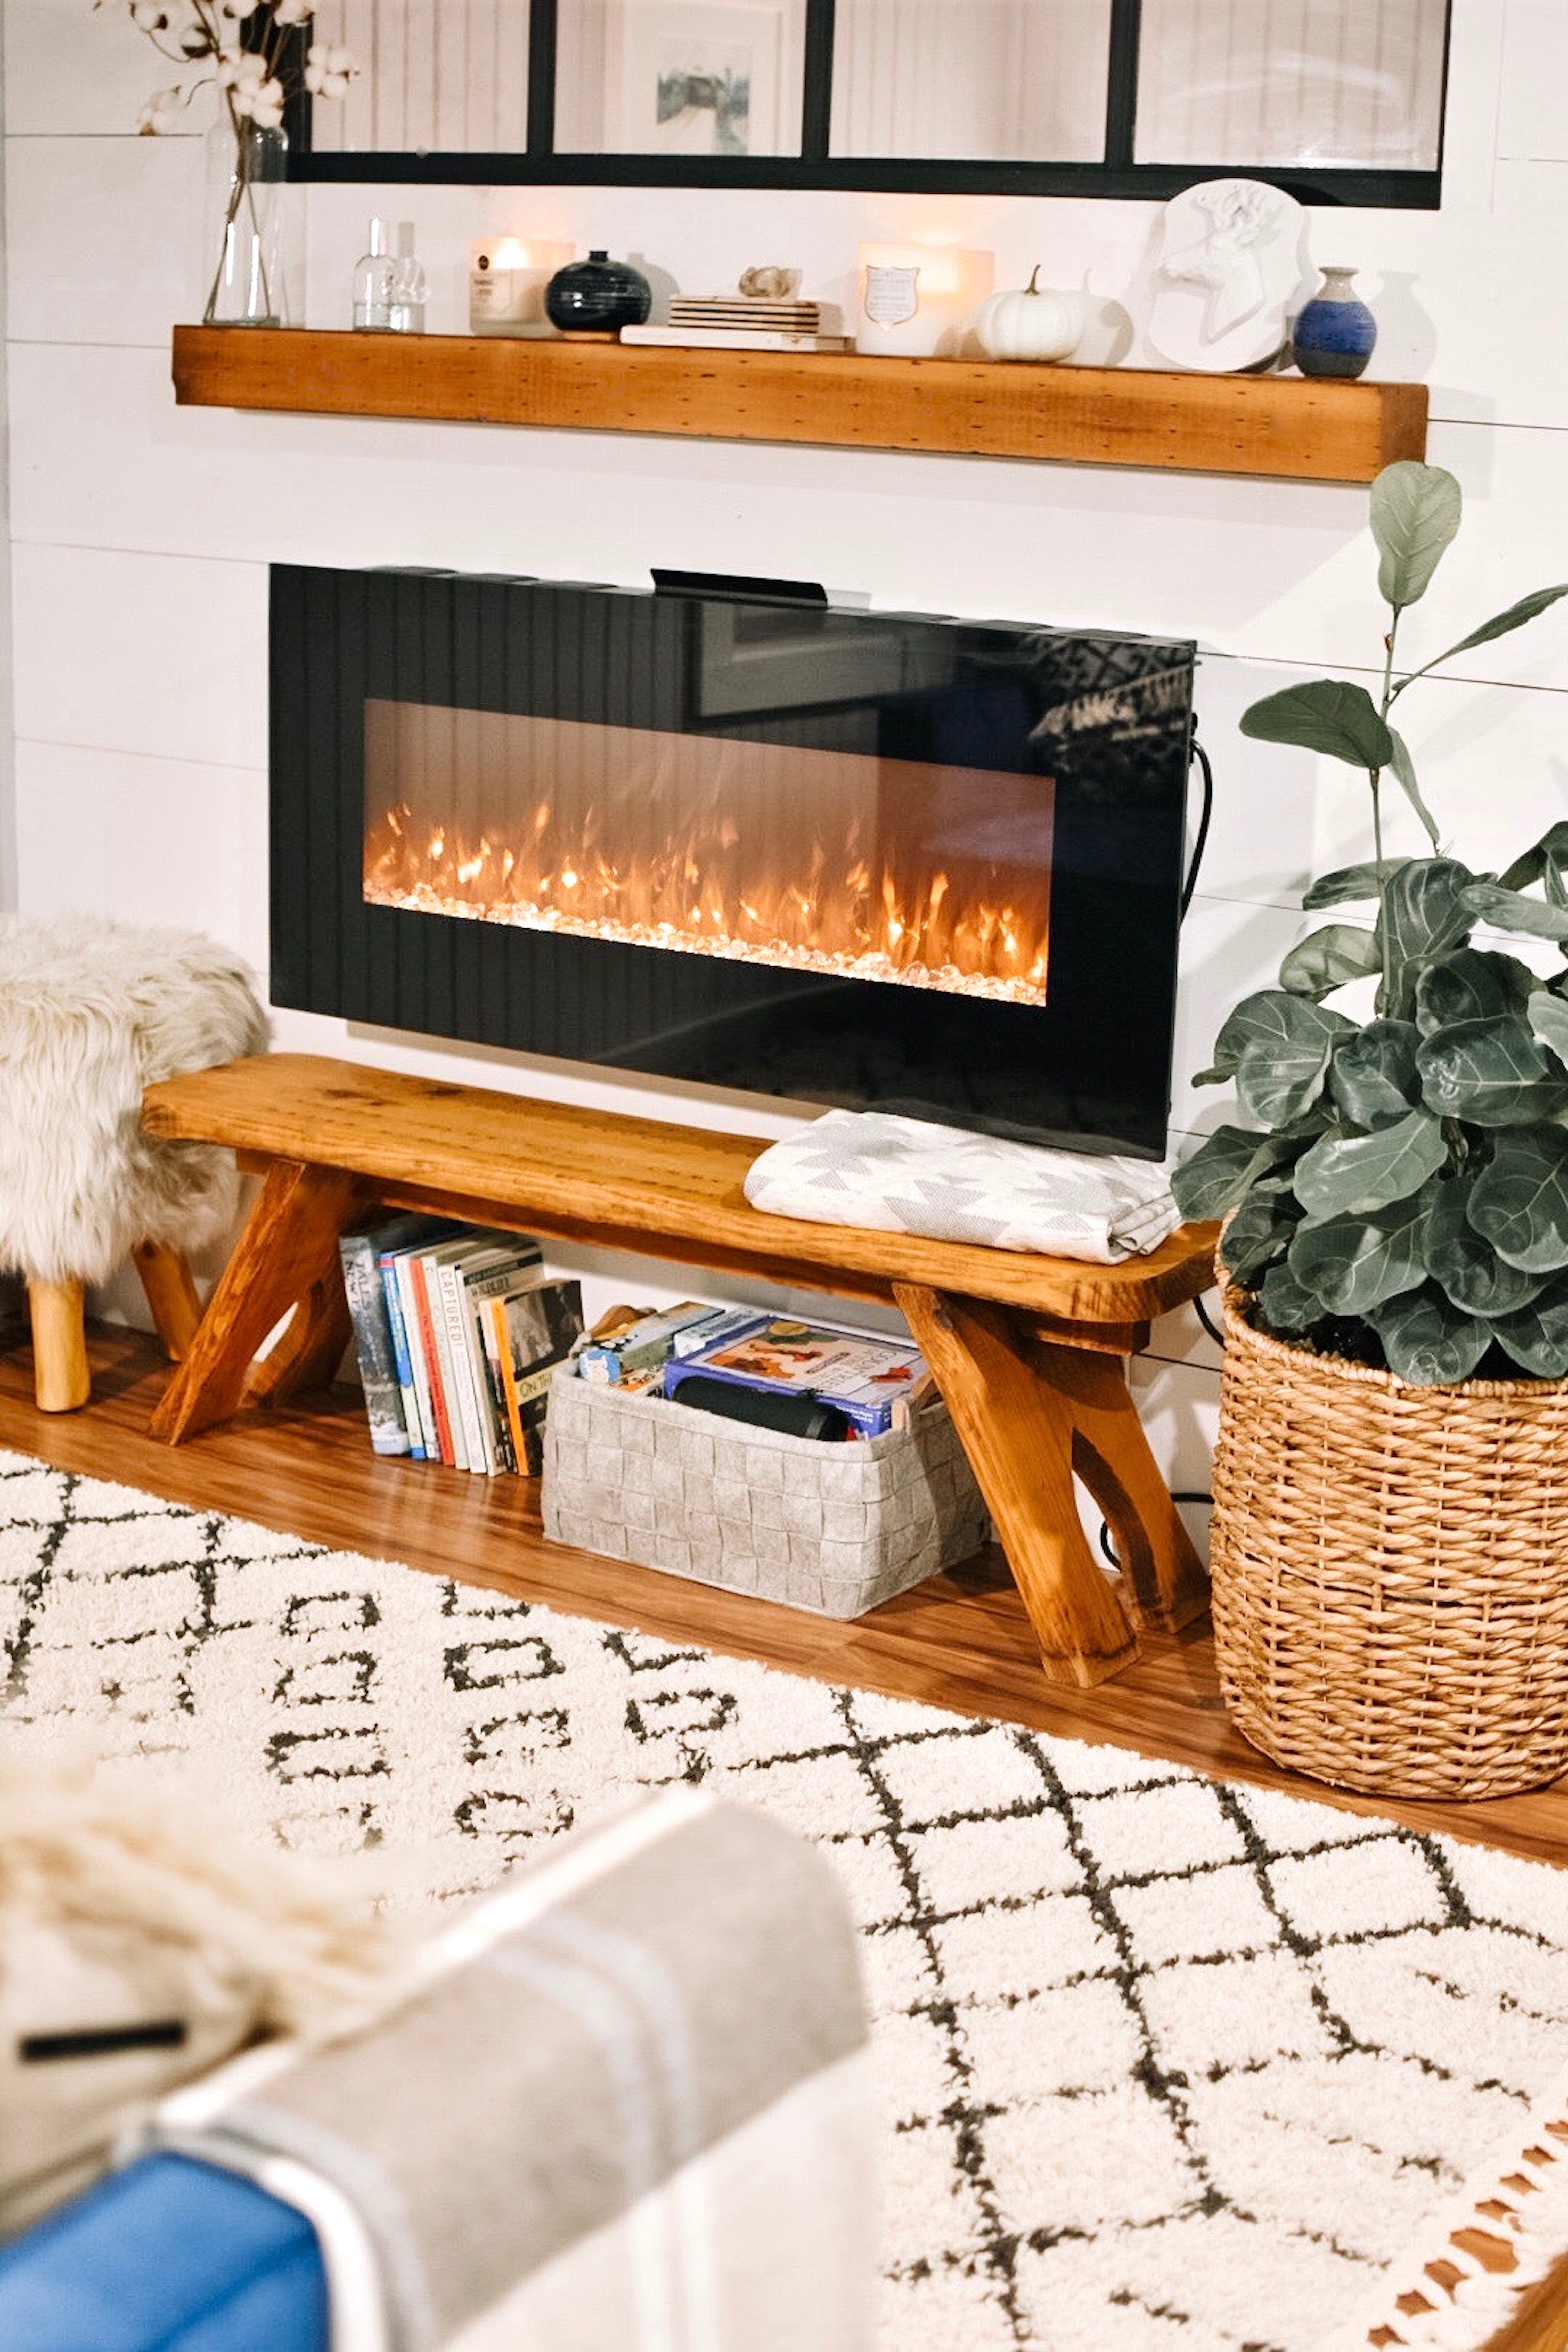 Winterizing Your Home: Essential Tips for a Warm and Energy-Efficient Season